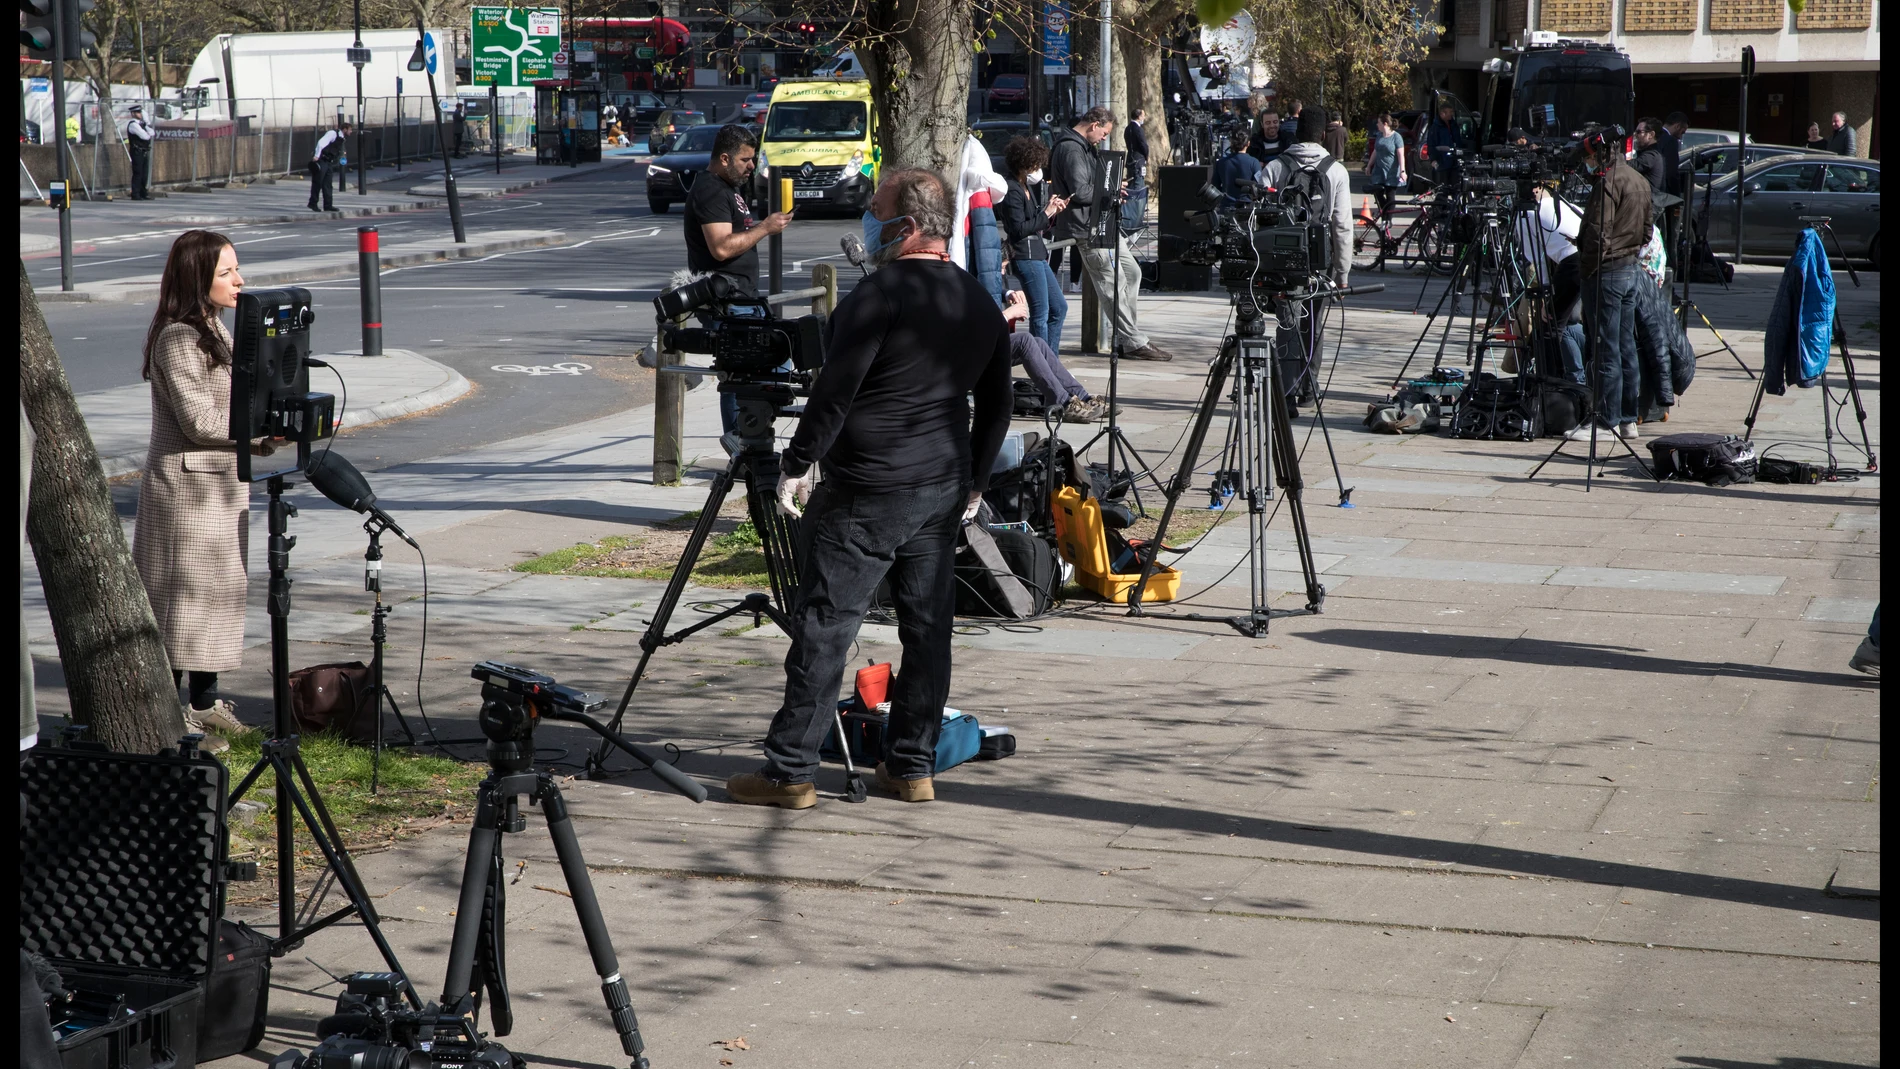 07/04/2020. London, United Kingdom: The worldÕs media outside St.ThomasÕ Hospital in London after Prime Minister Boris Johnson was transferred to the Intensive Care Unit. (Stephen Lock / i-Images / Contacto)07/04/2020 ONLY FOR USE IN SPAIN